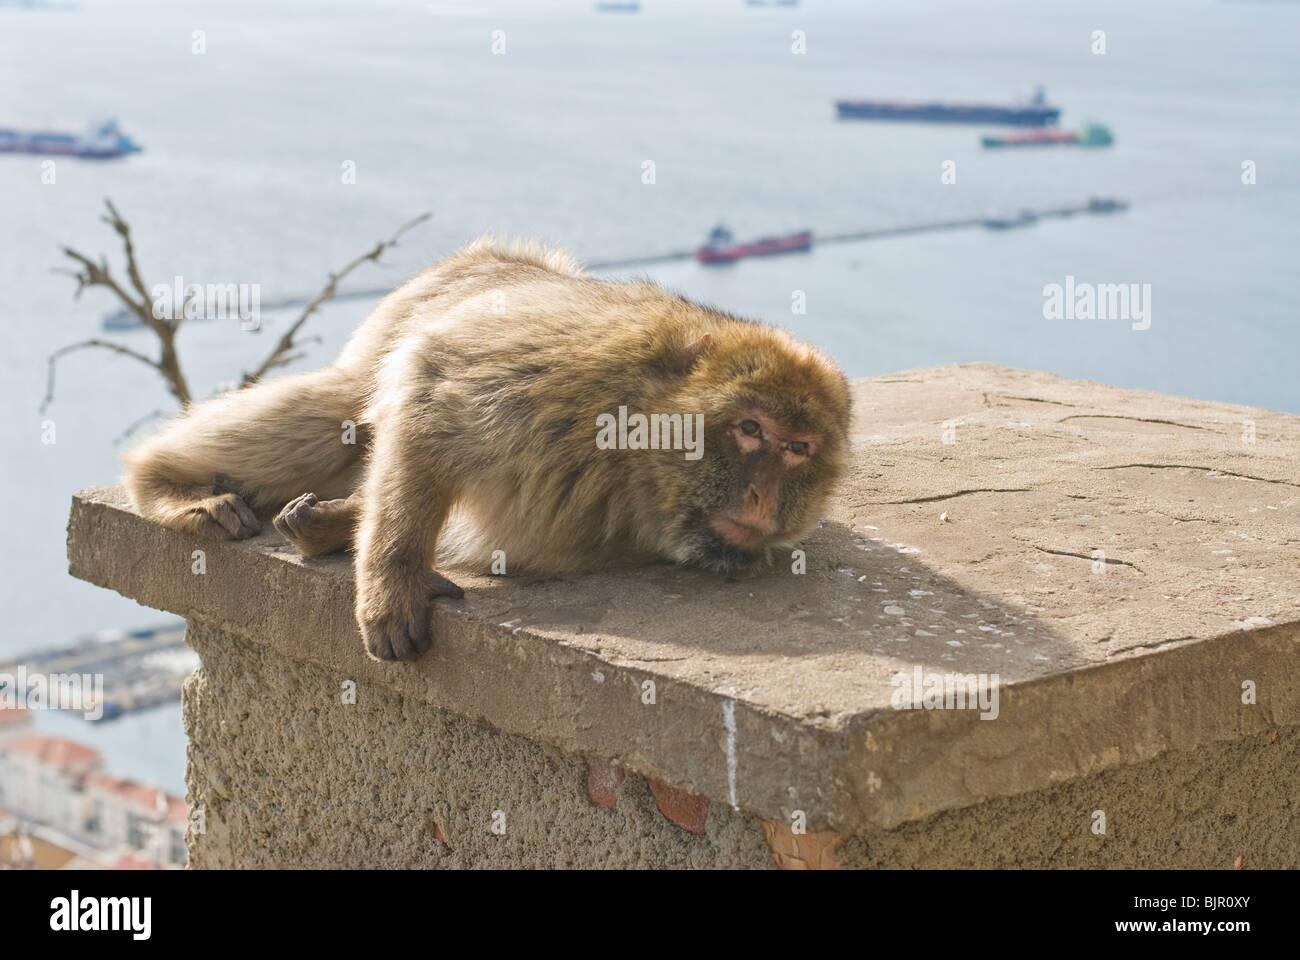 on of the famous moneys, a barbary macaque, on The Rock in Gibraltar Stock Photo